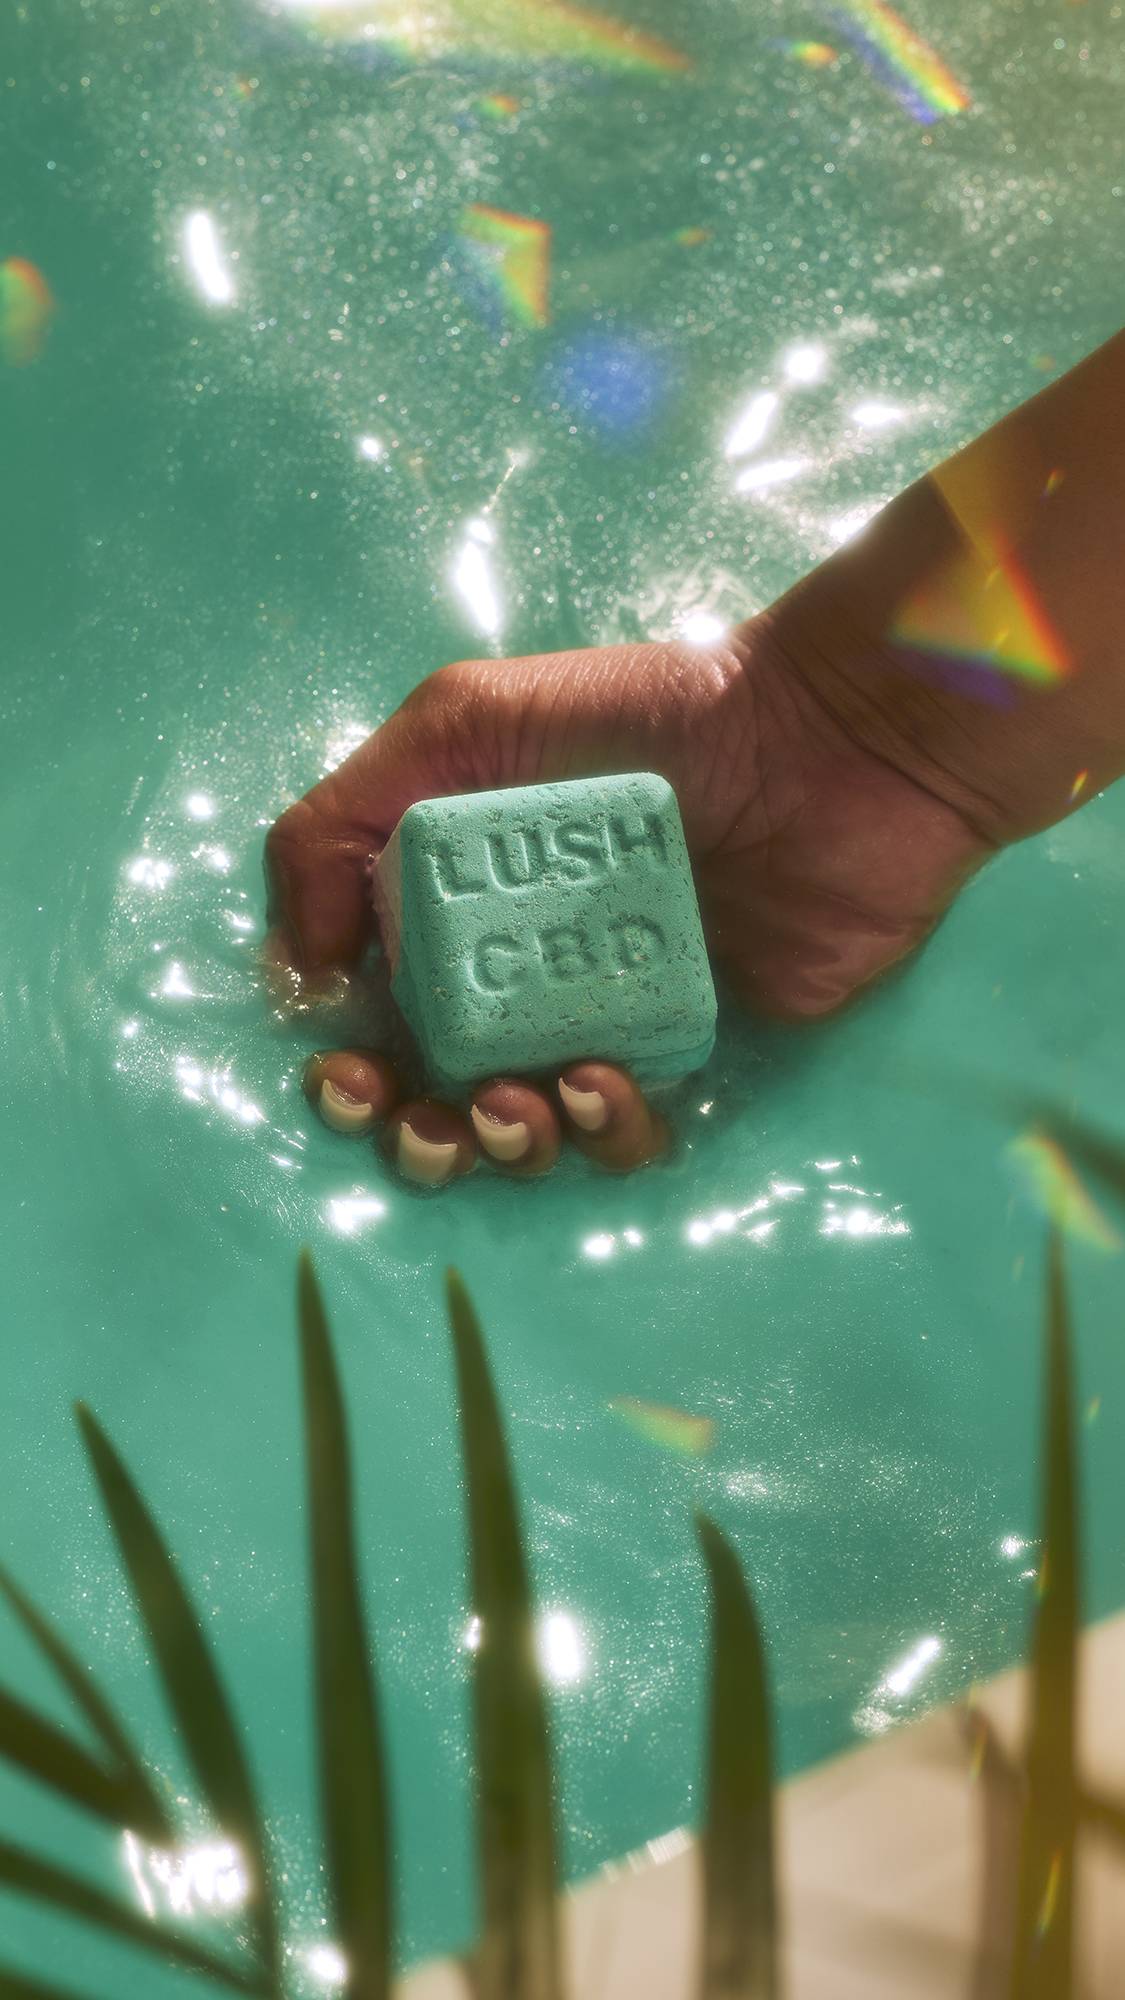 A close-up image of the model's hand holding the Magik bath bomb just under the water creating ripples of shimmering teal water. Some plant leaves are just visible and there are flecks of rainbow reflections. 